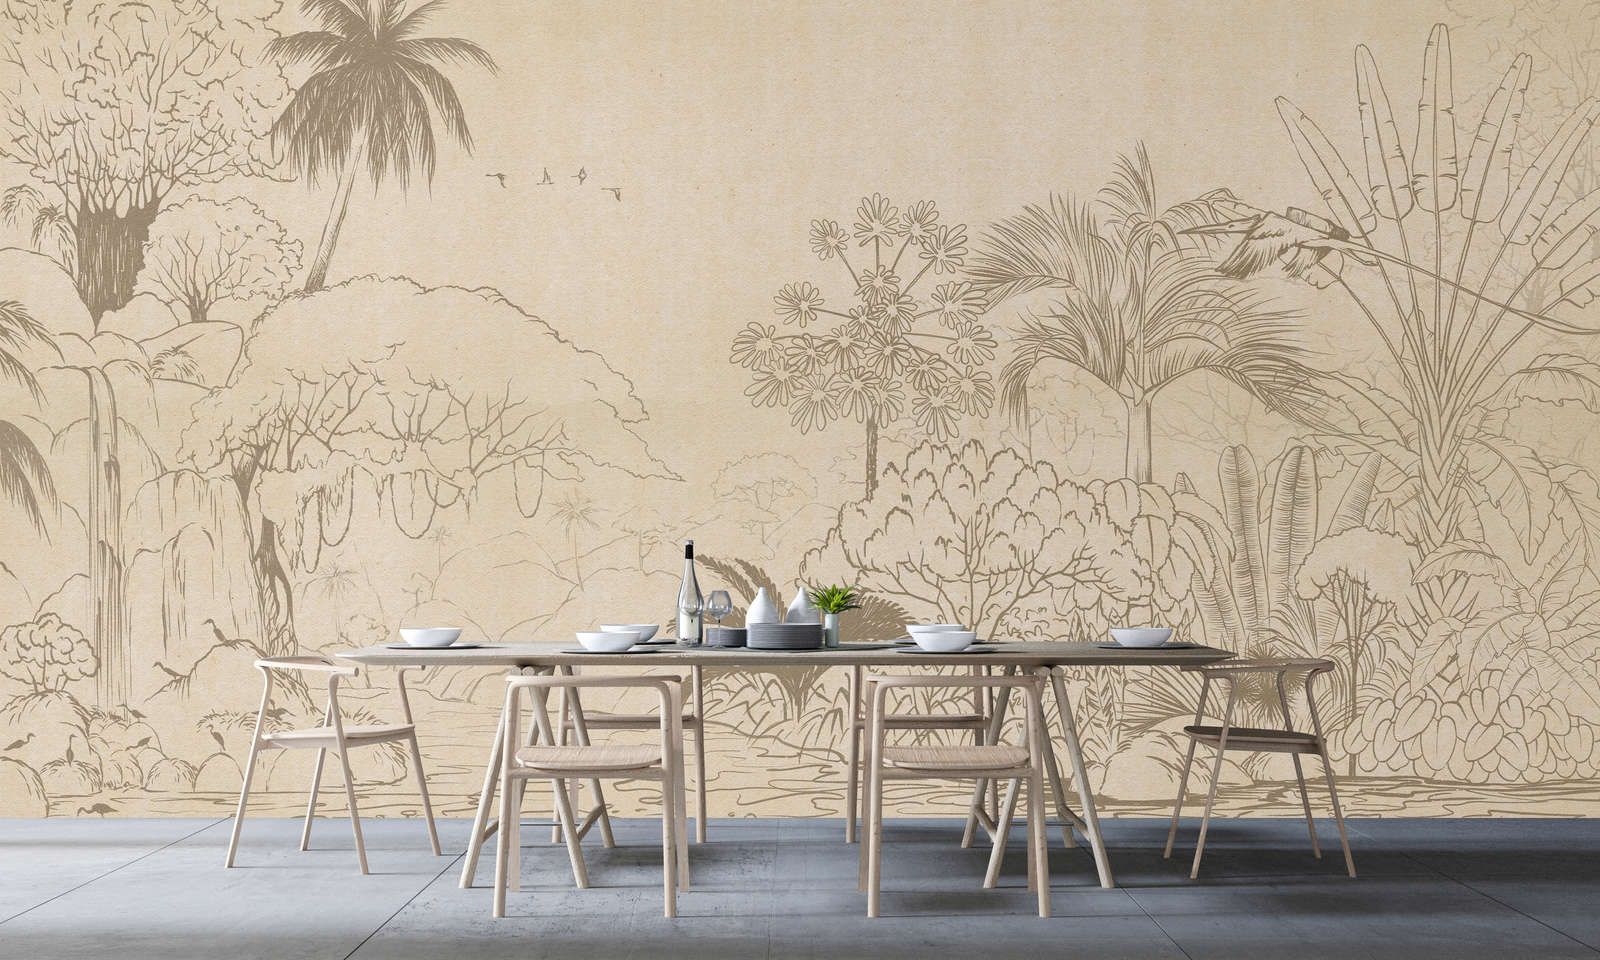             Photo wallpaper »oasis« - Jungle in drawing style with handmade paper look - matt, smooth non-woven fabric
        